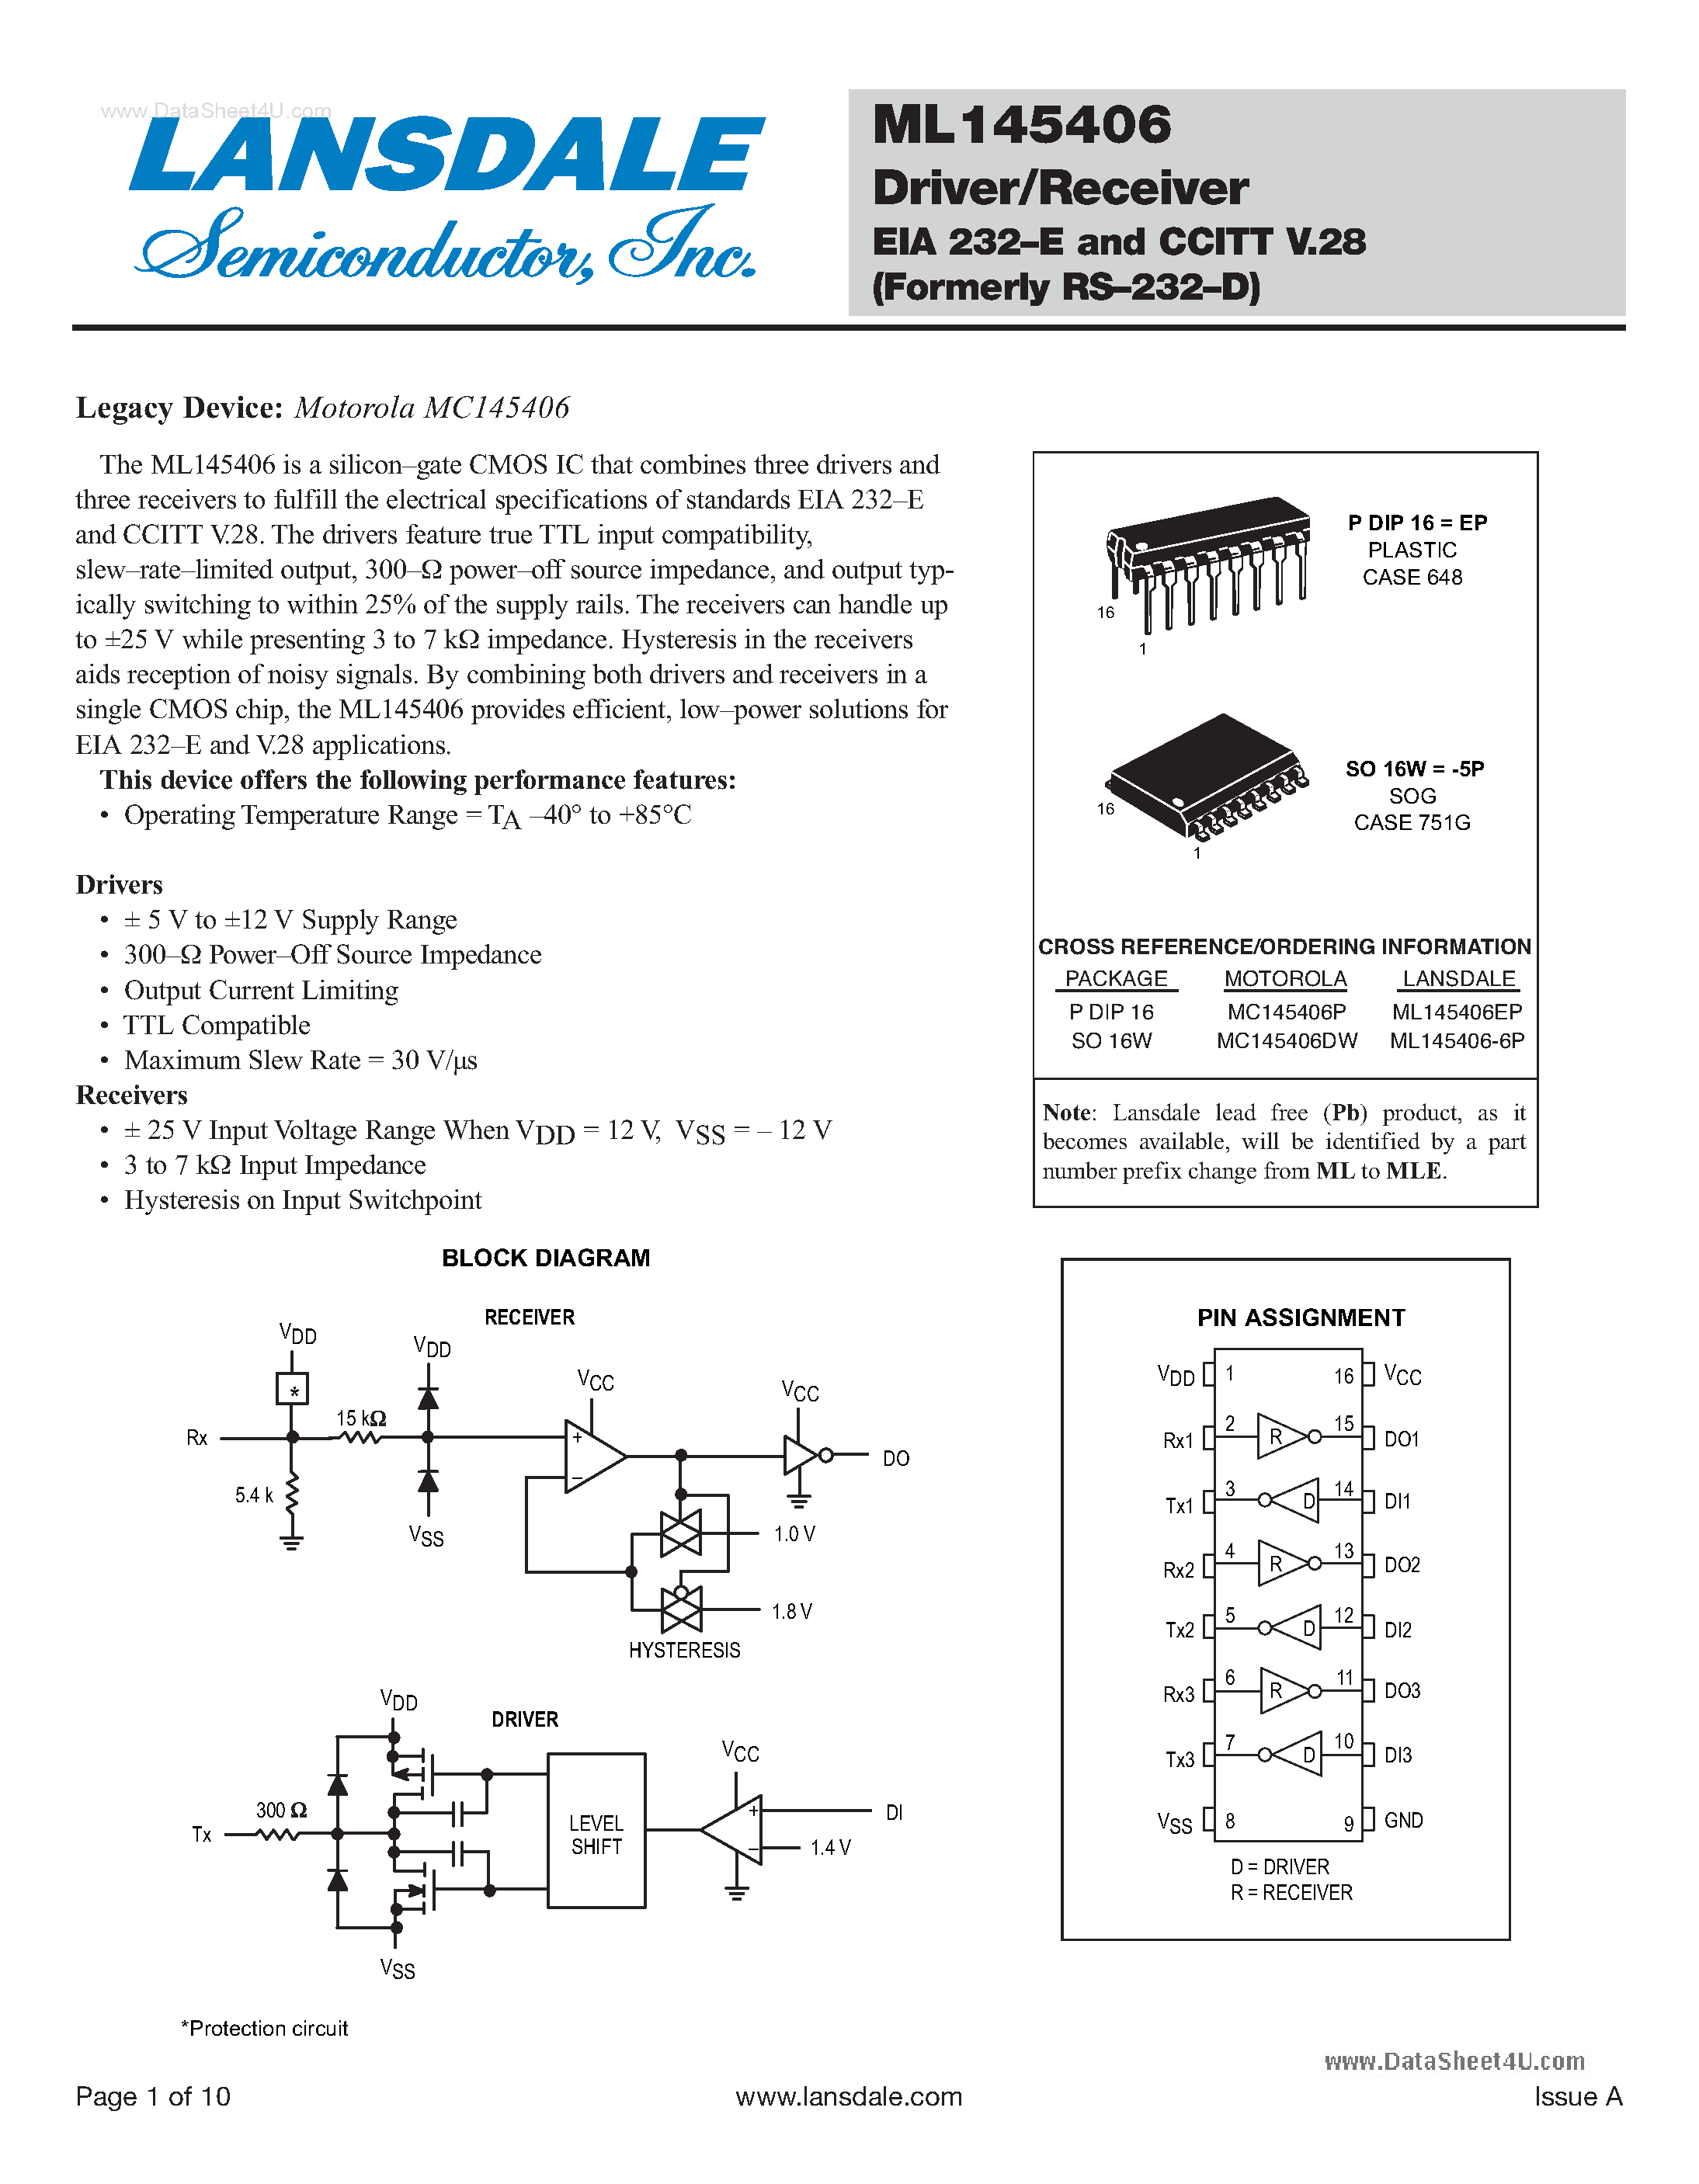 Datasheet ML145406 - Driver/Receiver page 1